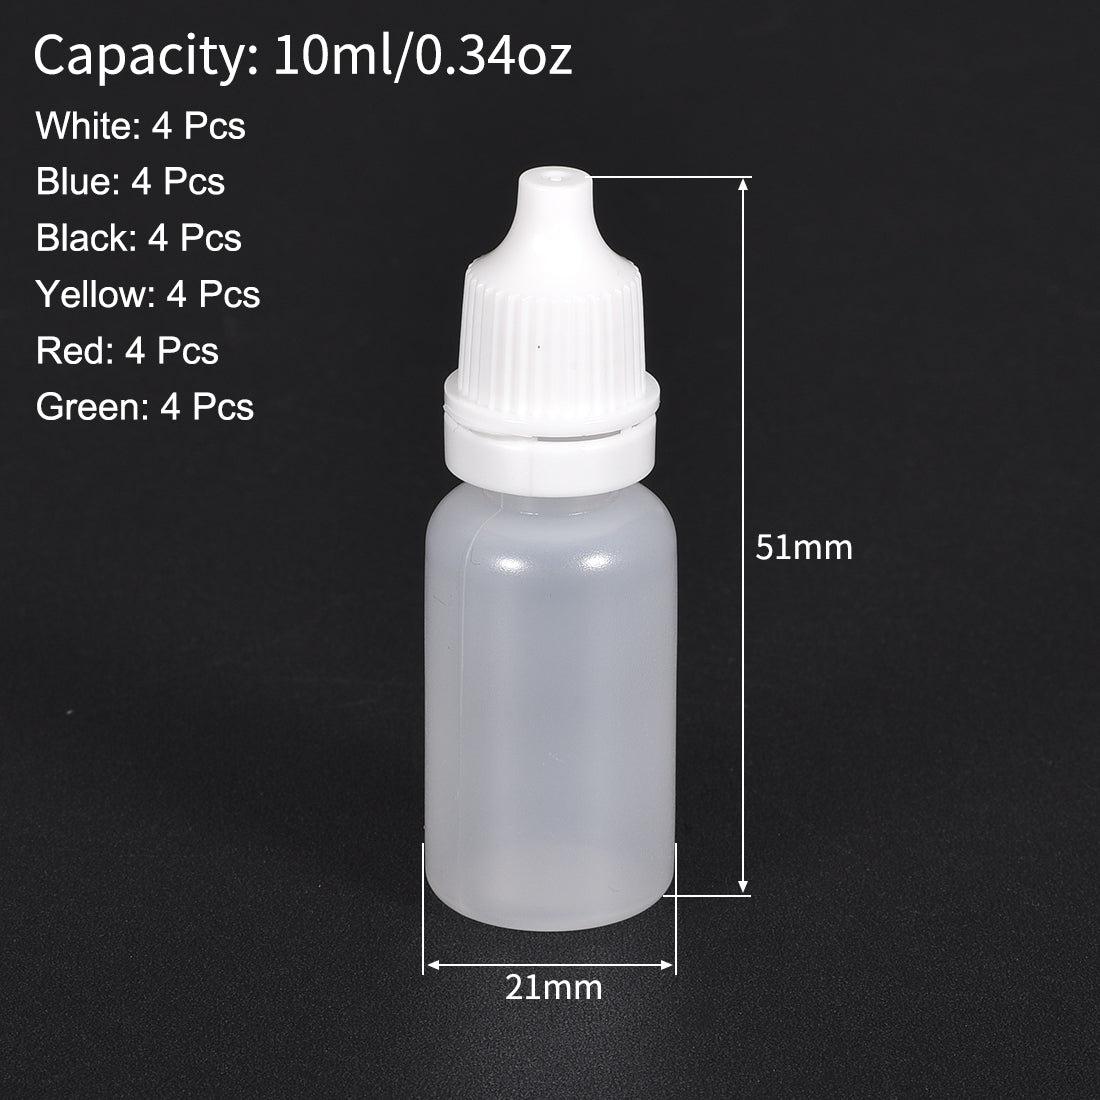 uxcell Uxcell 10ml/0.34 oz Empty Squeezable Dropper Bottle 24pcs